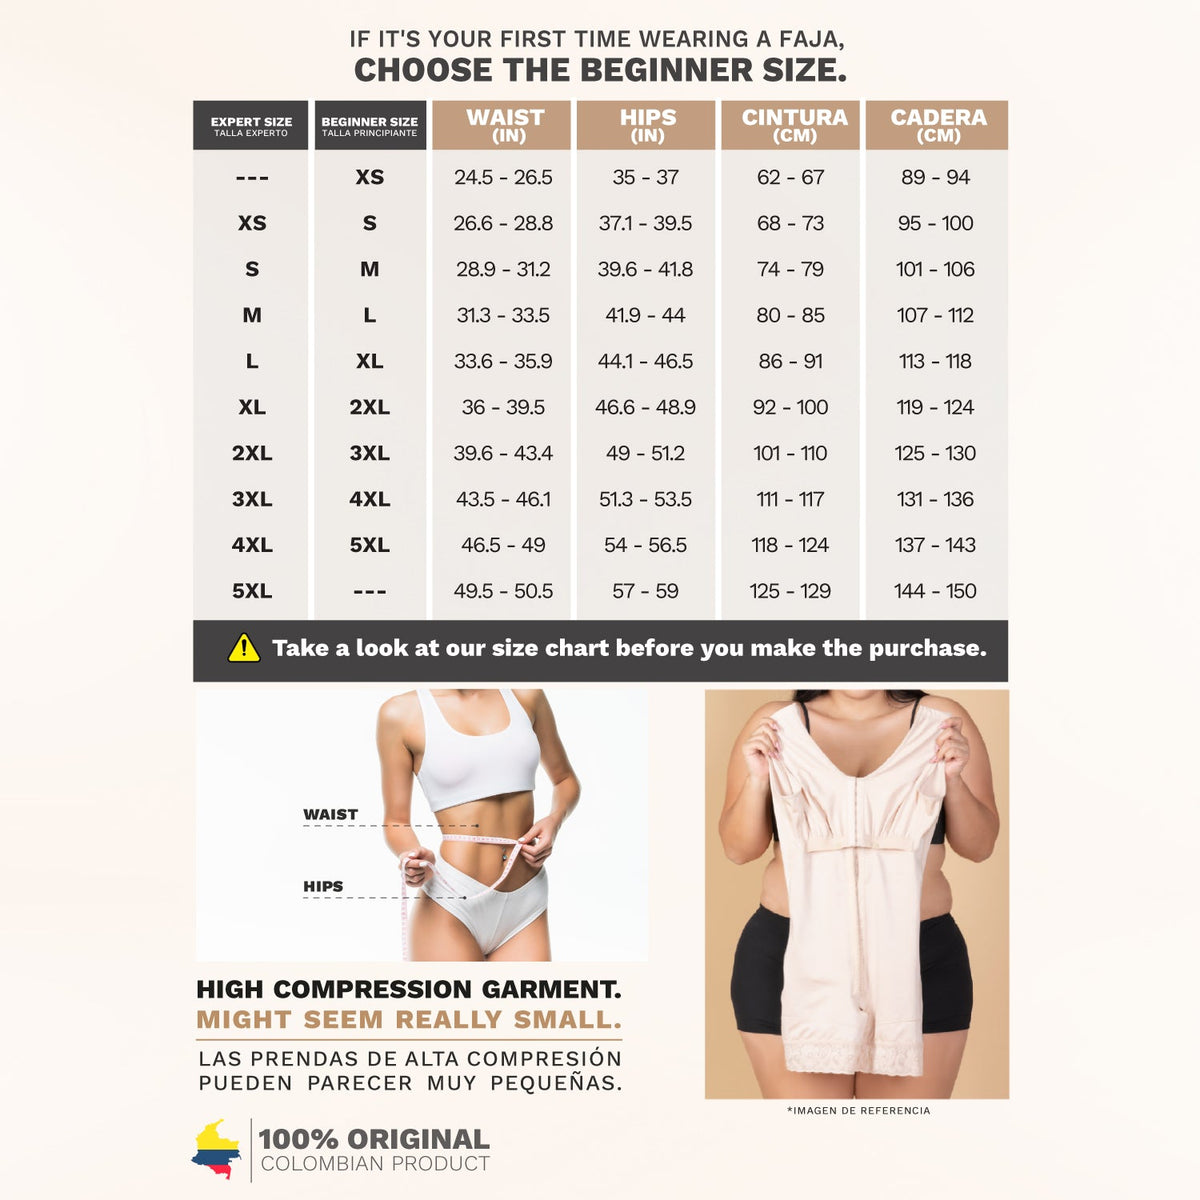 SONRYSE 014ZL  Knee Length with Built-in bra & High Back | Post Surgery and Postpartum Use